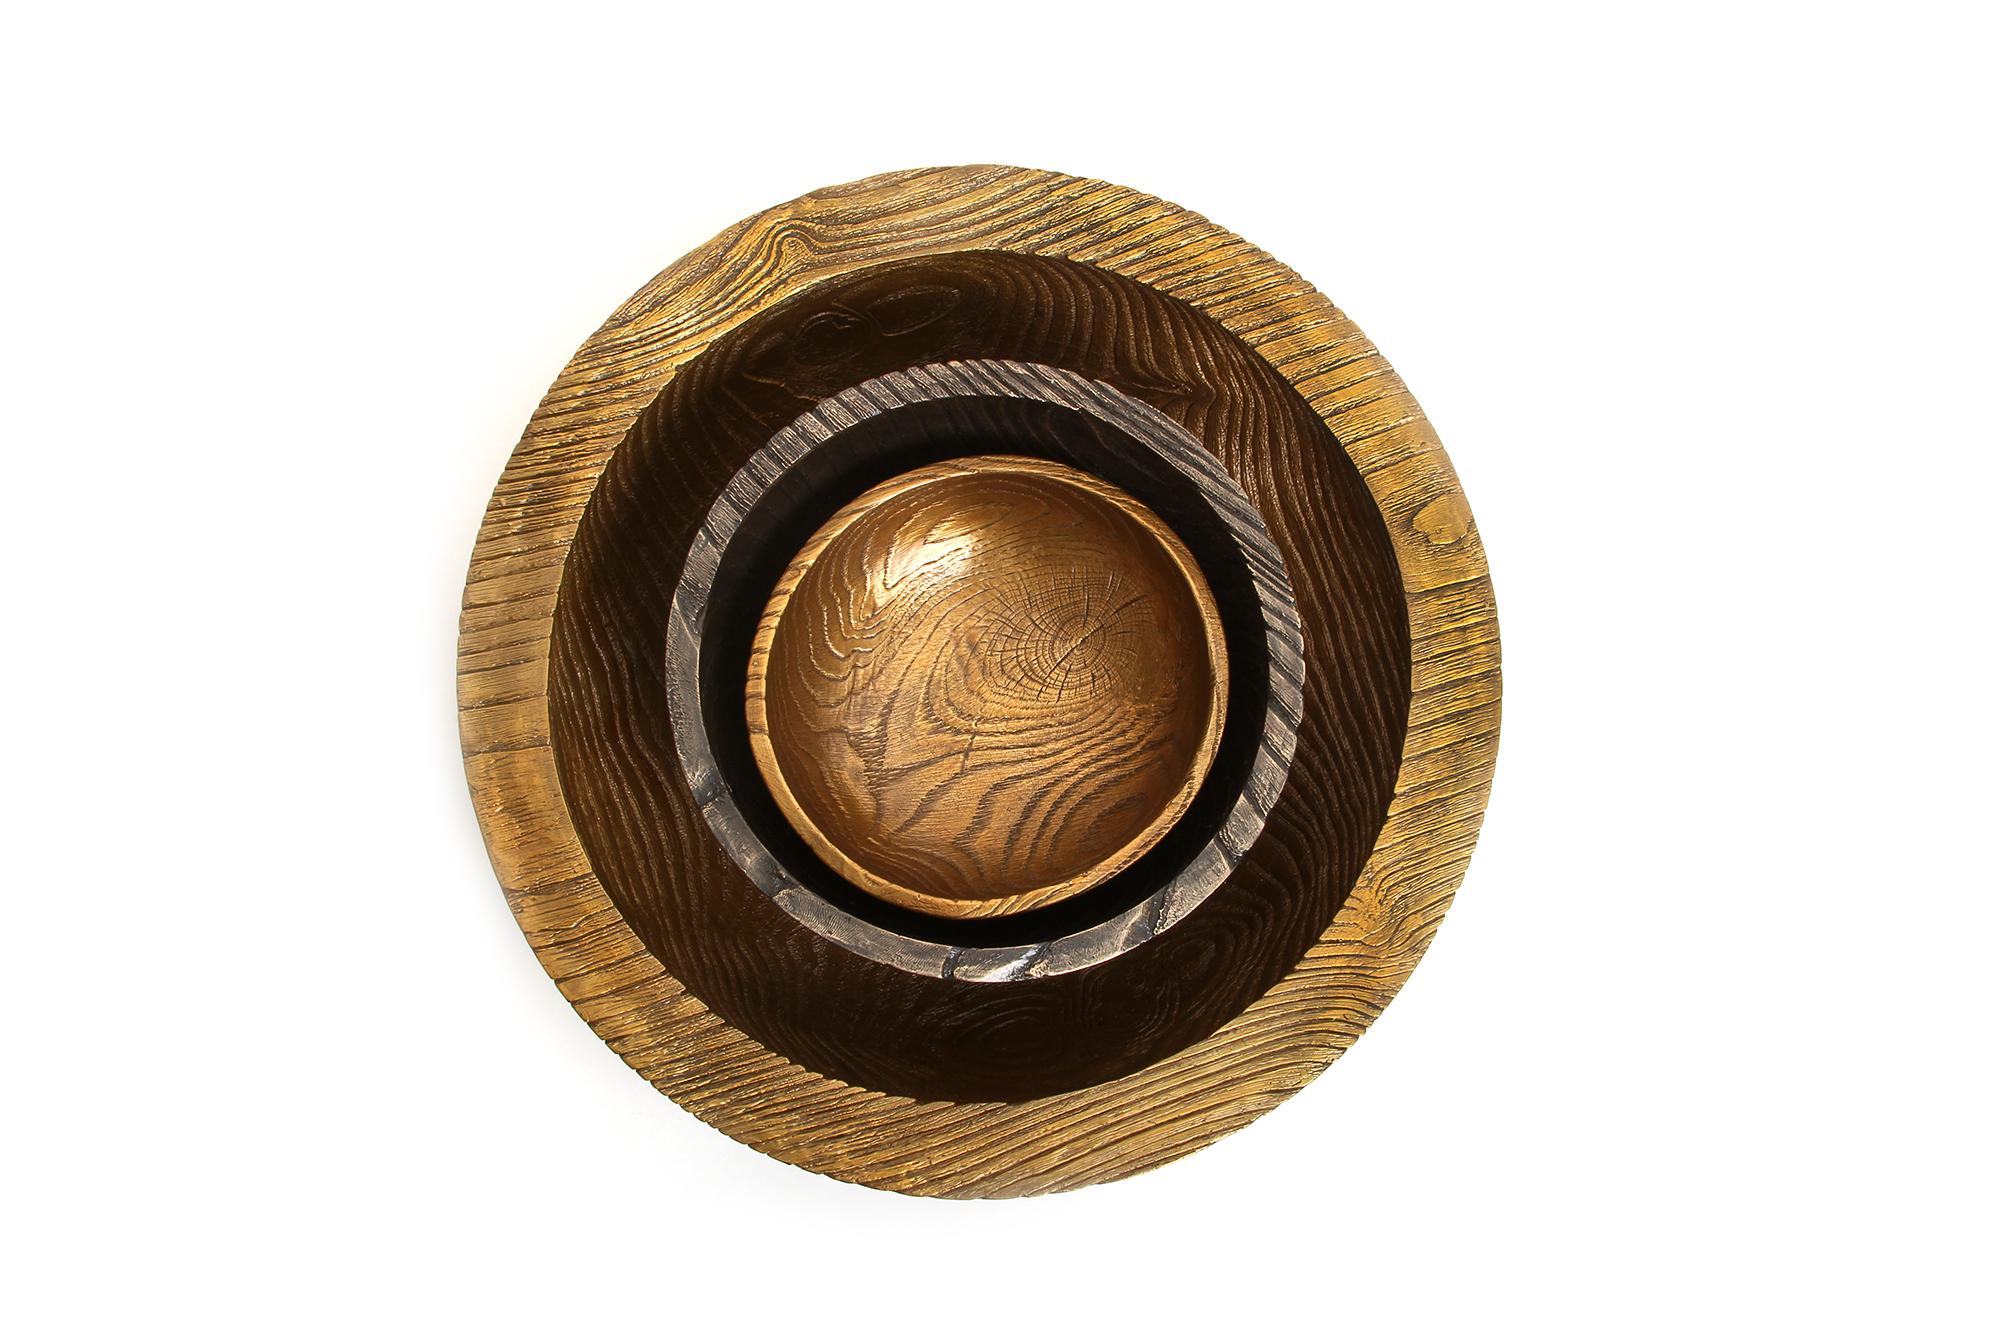 Solid Bronze Everest Bowl / Vessel with Wooden Texture and Golden Bronze Patina For Sale 6